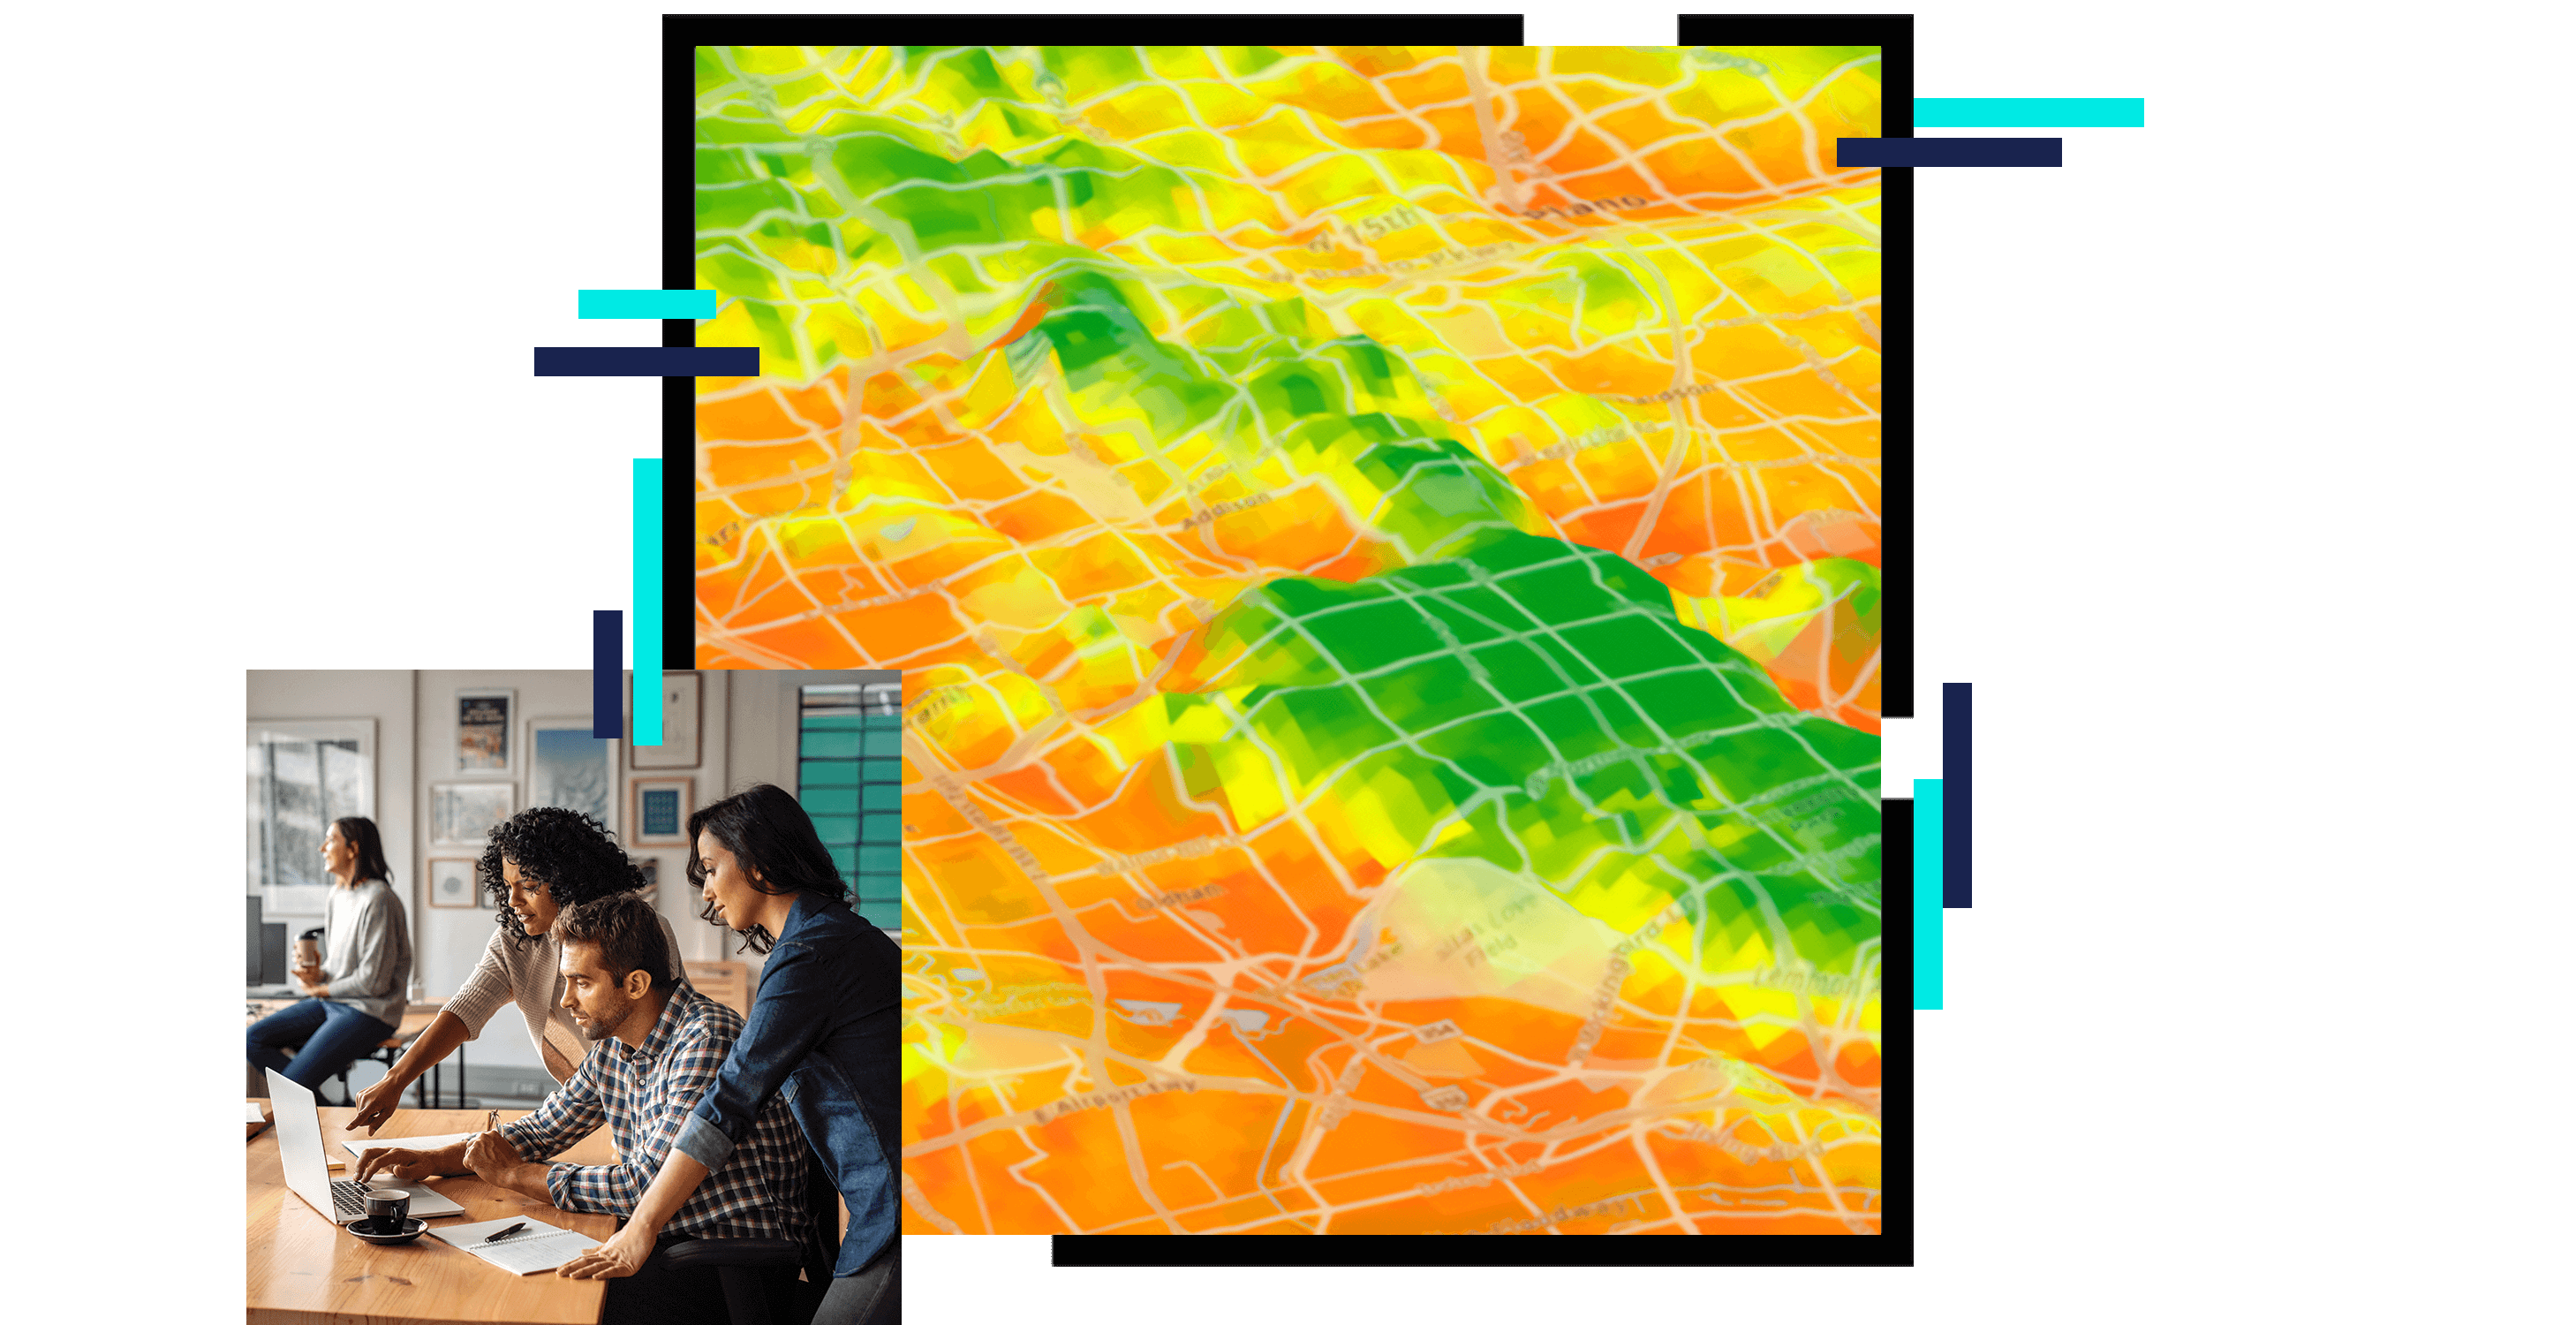 A gridded heat map of a hilly area in green, yellow, and orange, overlaid with a photo of three casually-dressed people in an office environment grouped around a laptop in discussion